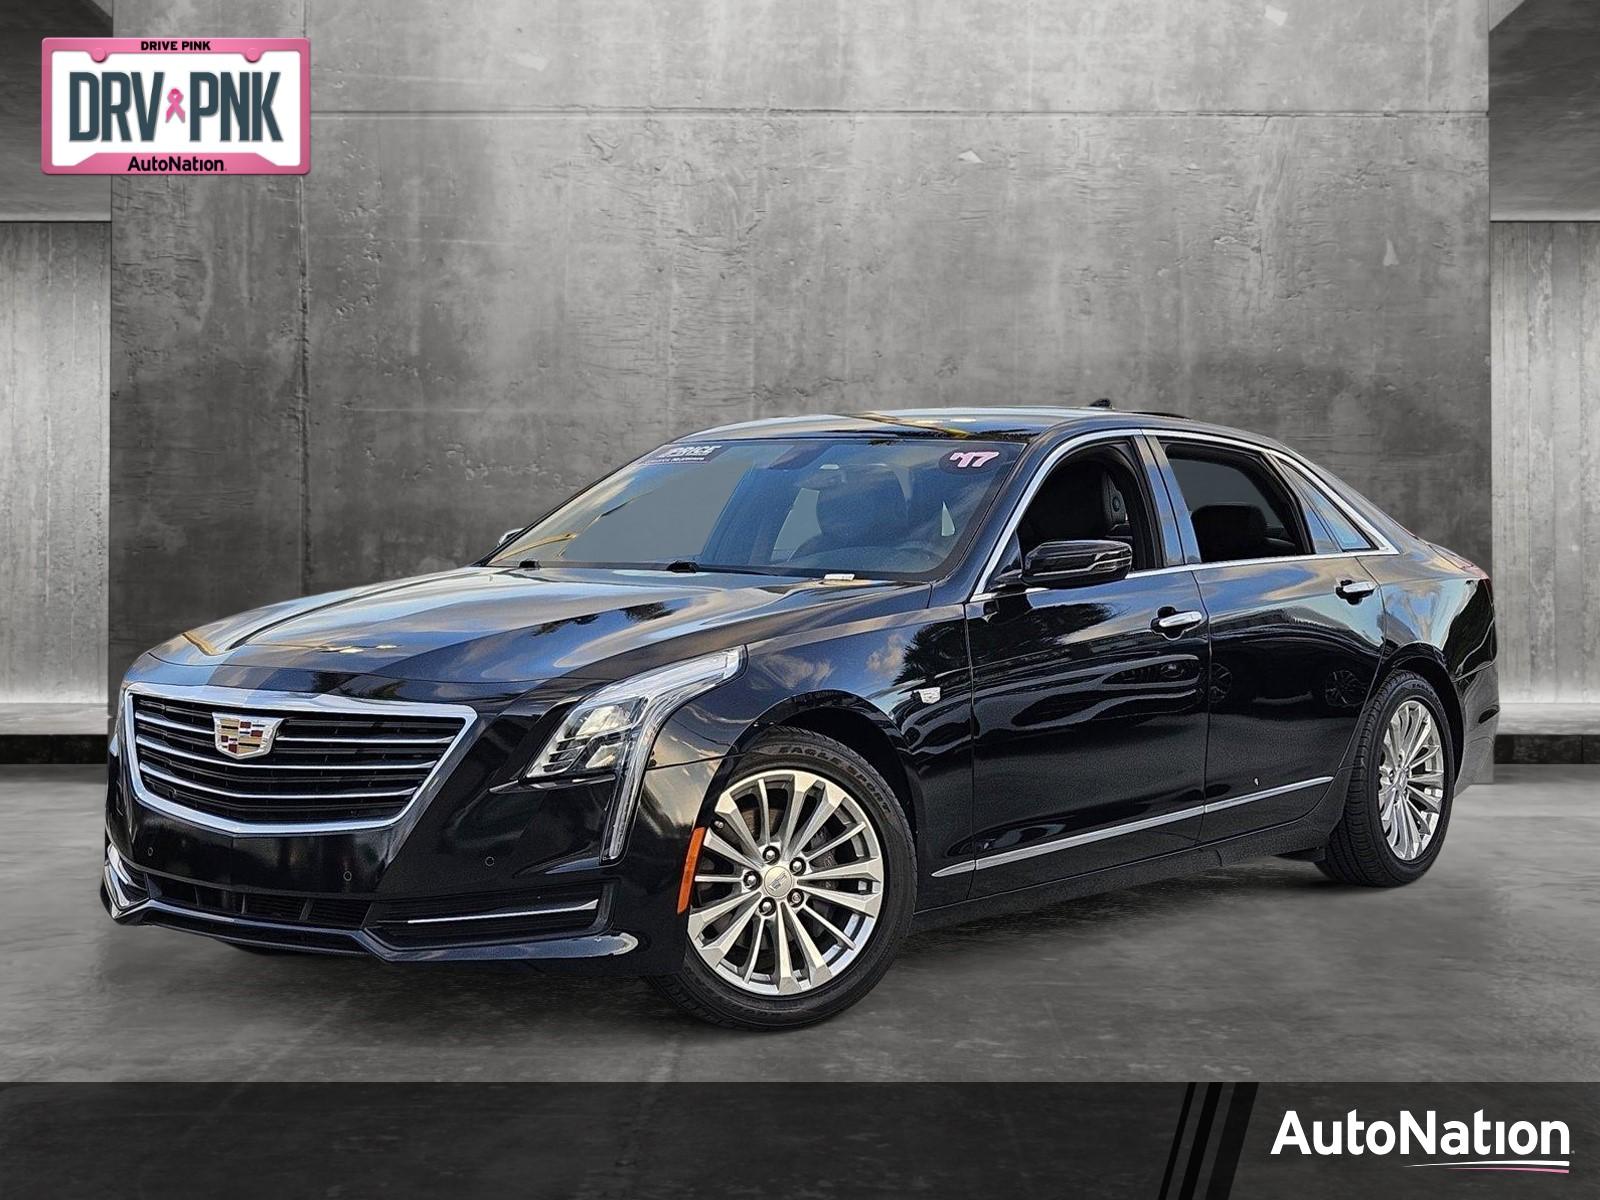 2017 Cadillac CT6 Vehicle Photo in Fort Lauderdale, FL 33316